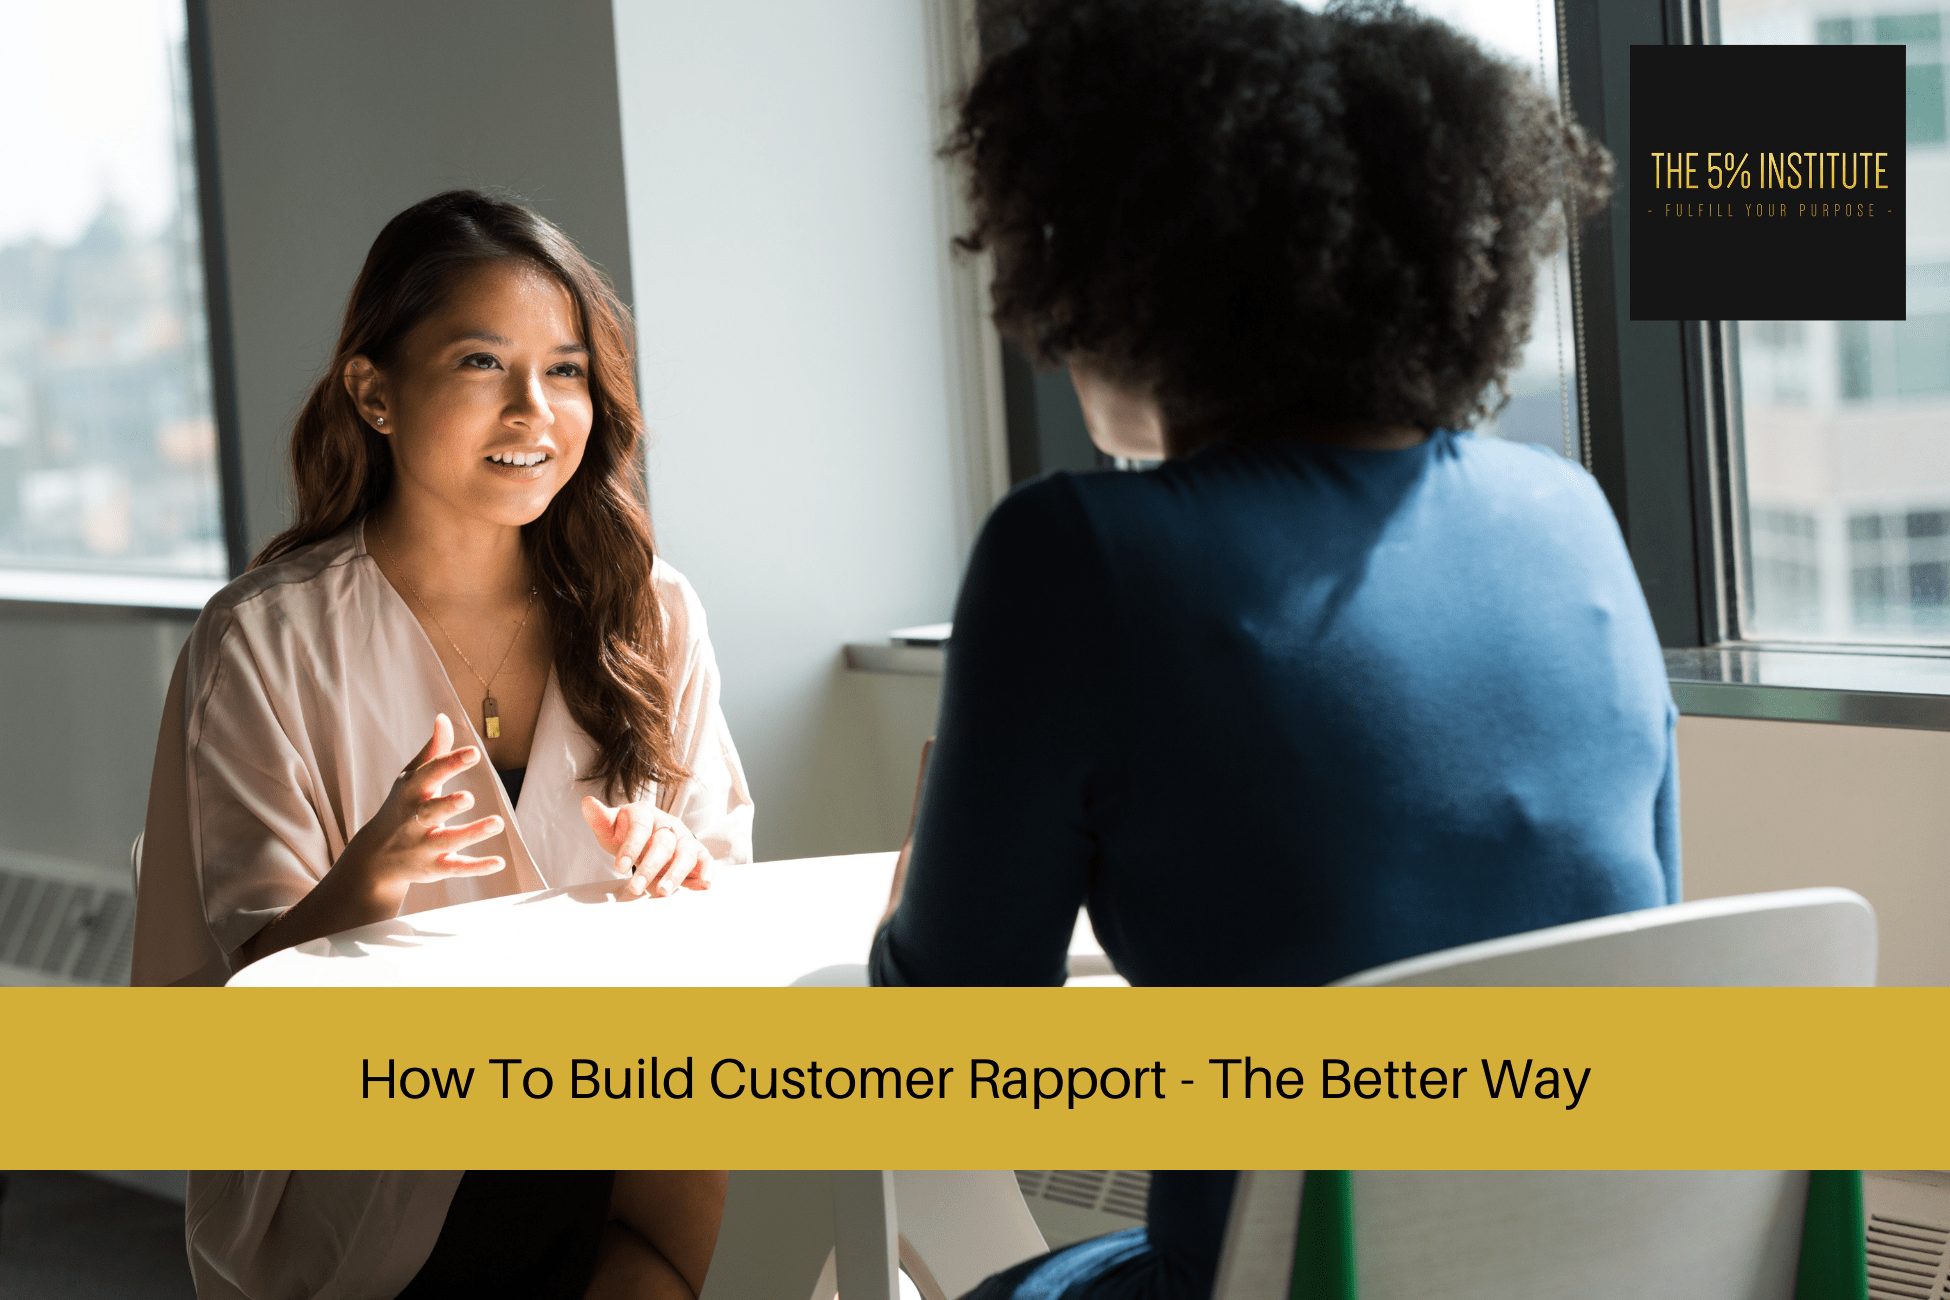 How To Build Customer Rapport - The Better Way